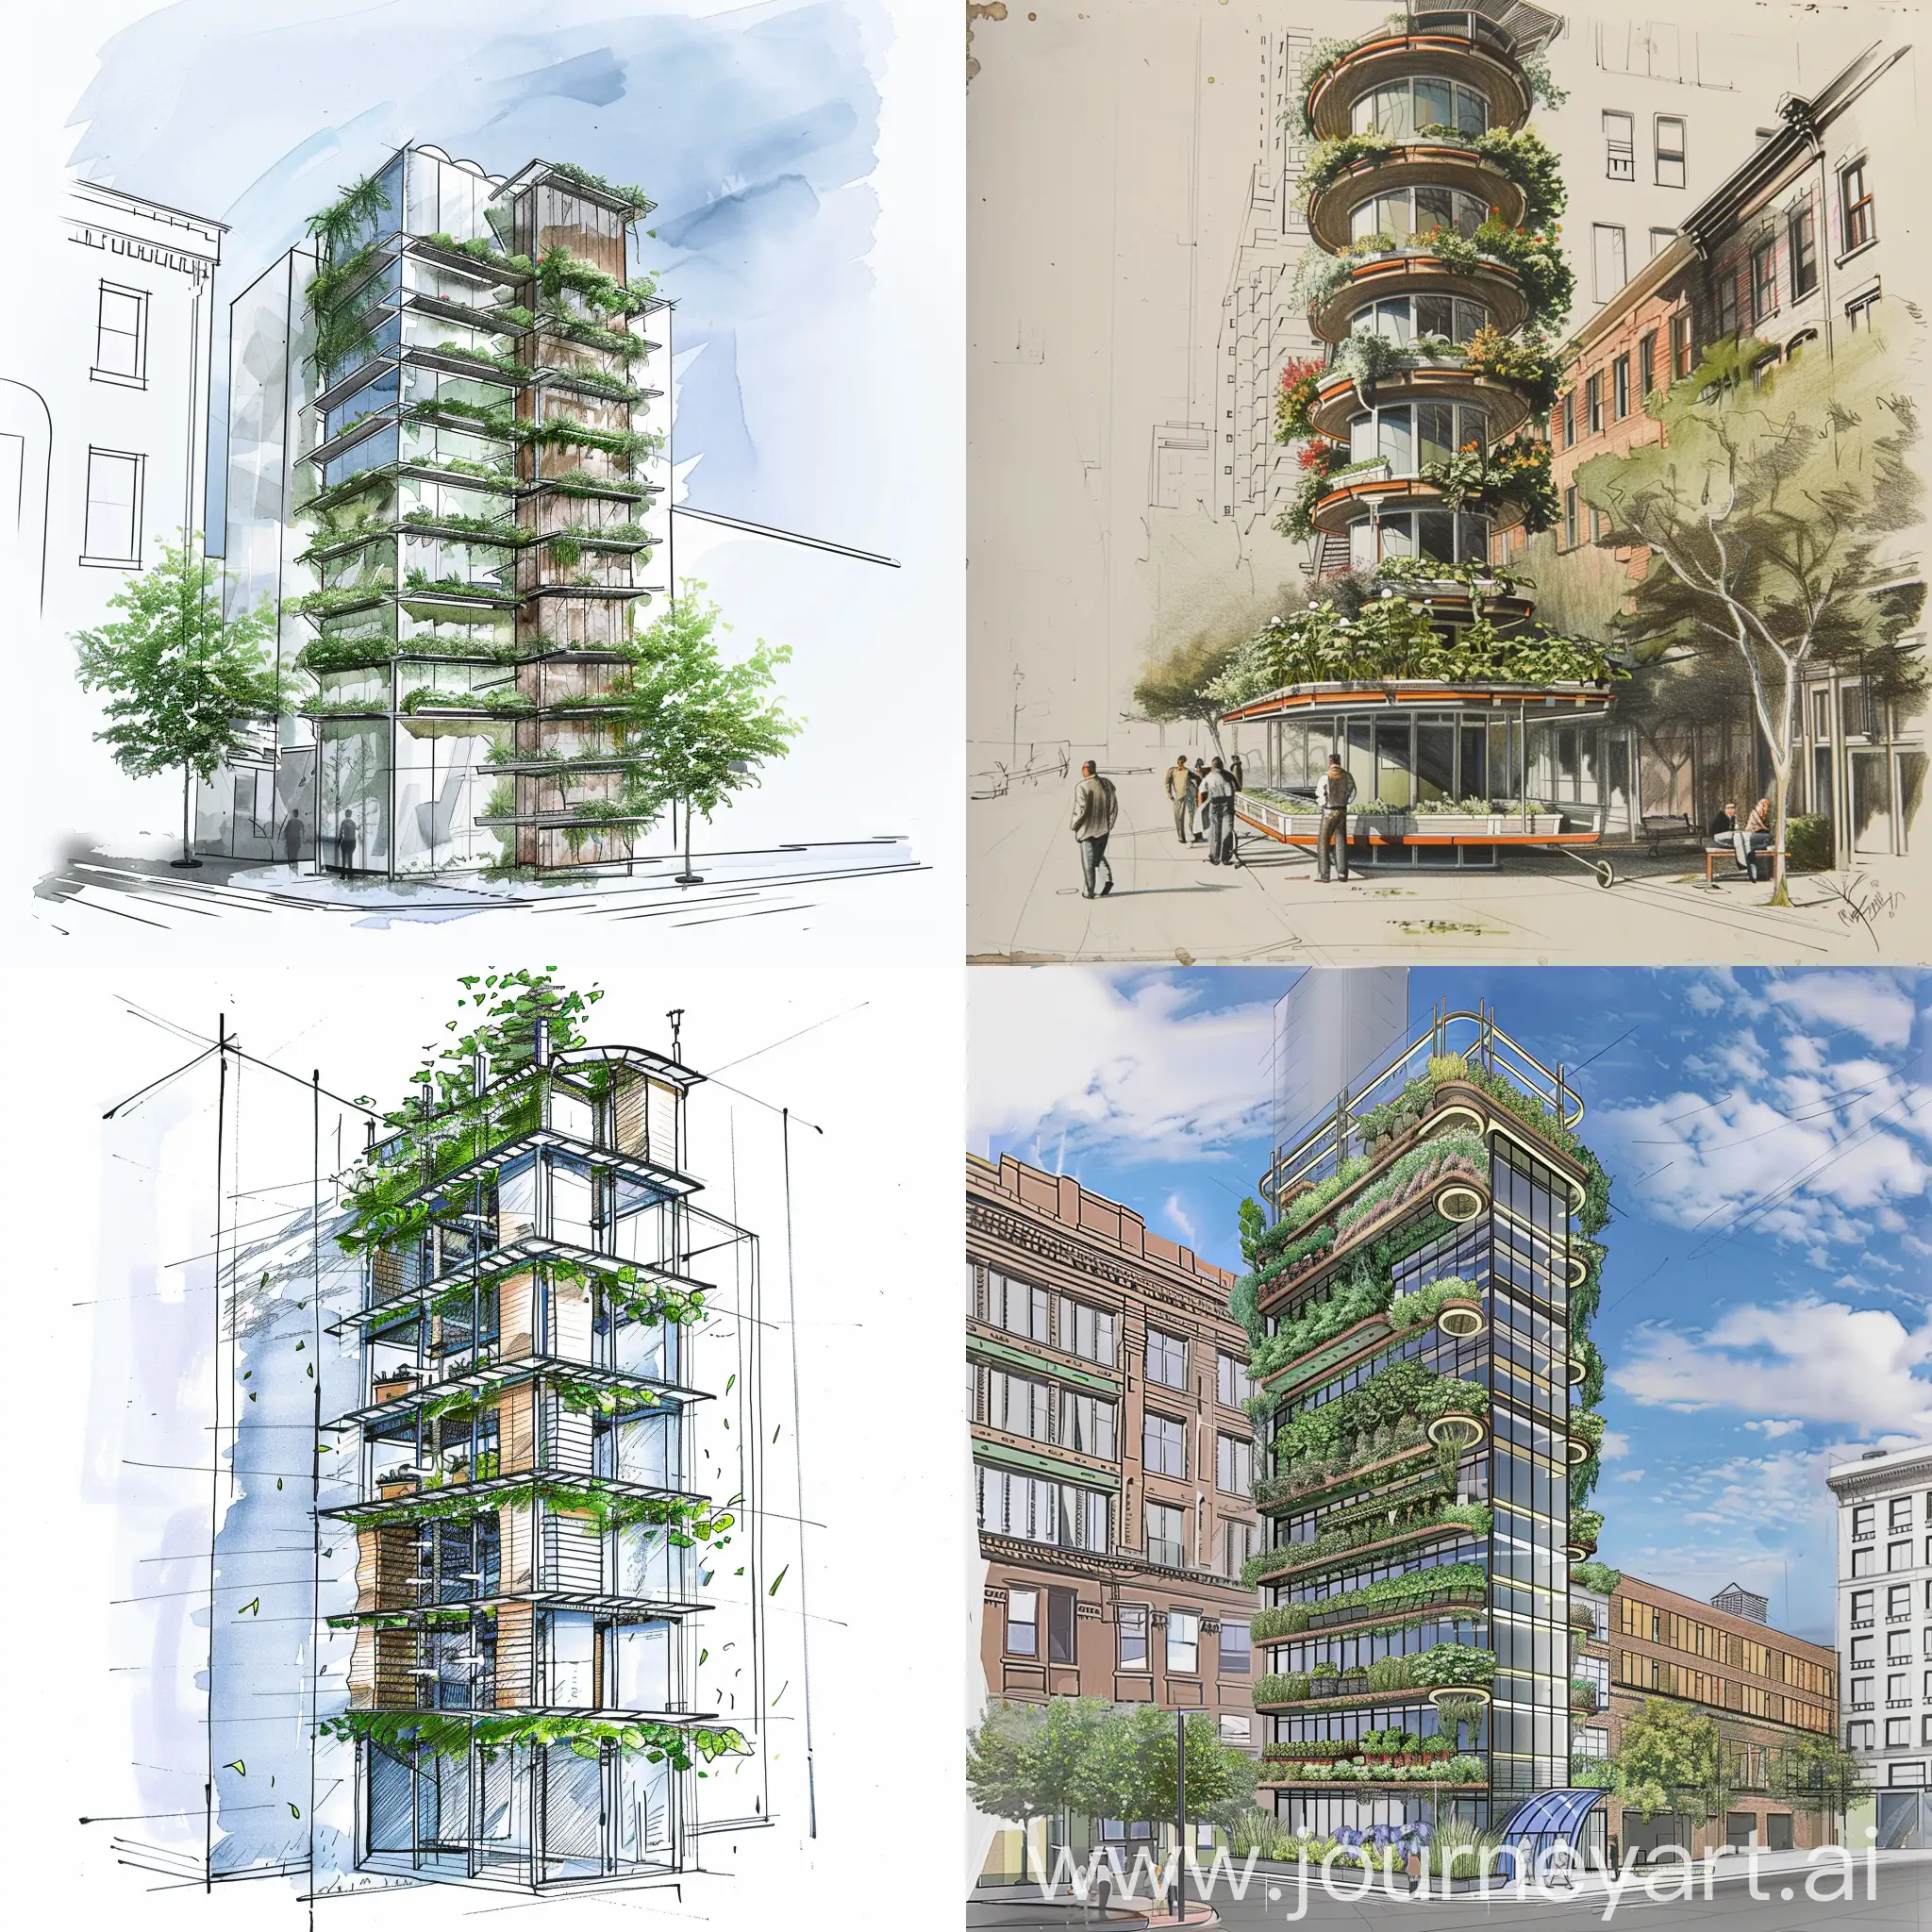 draw hydroponic tower on building facade